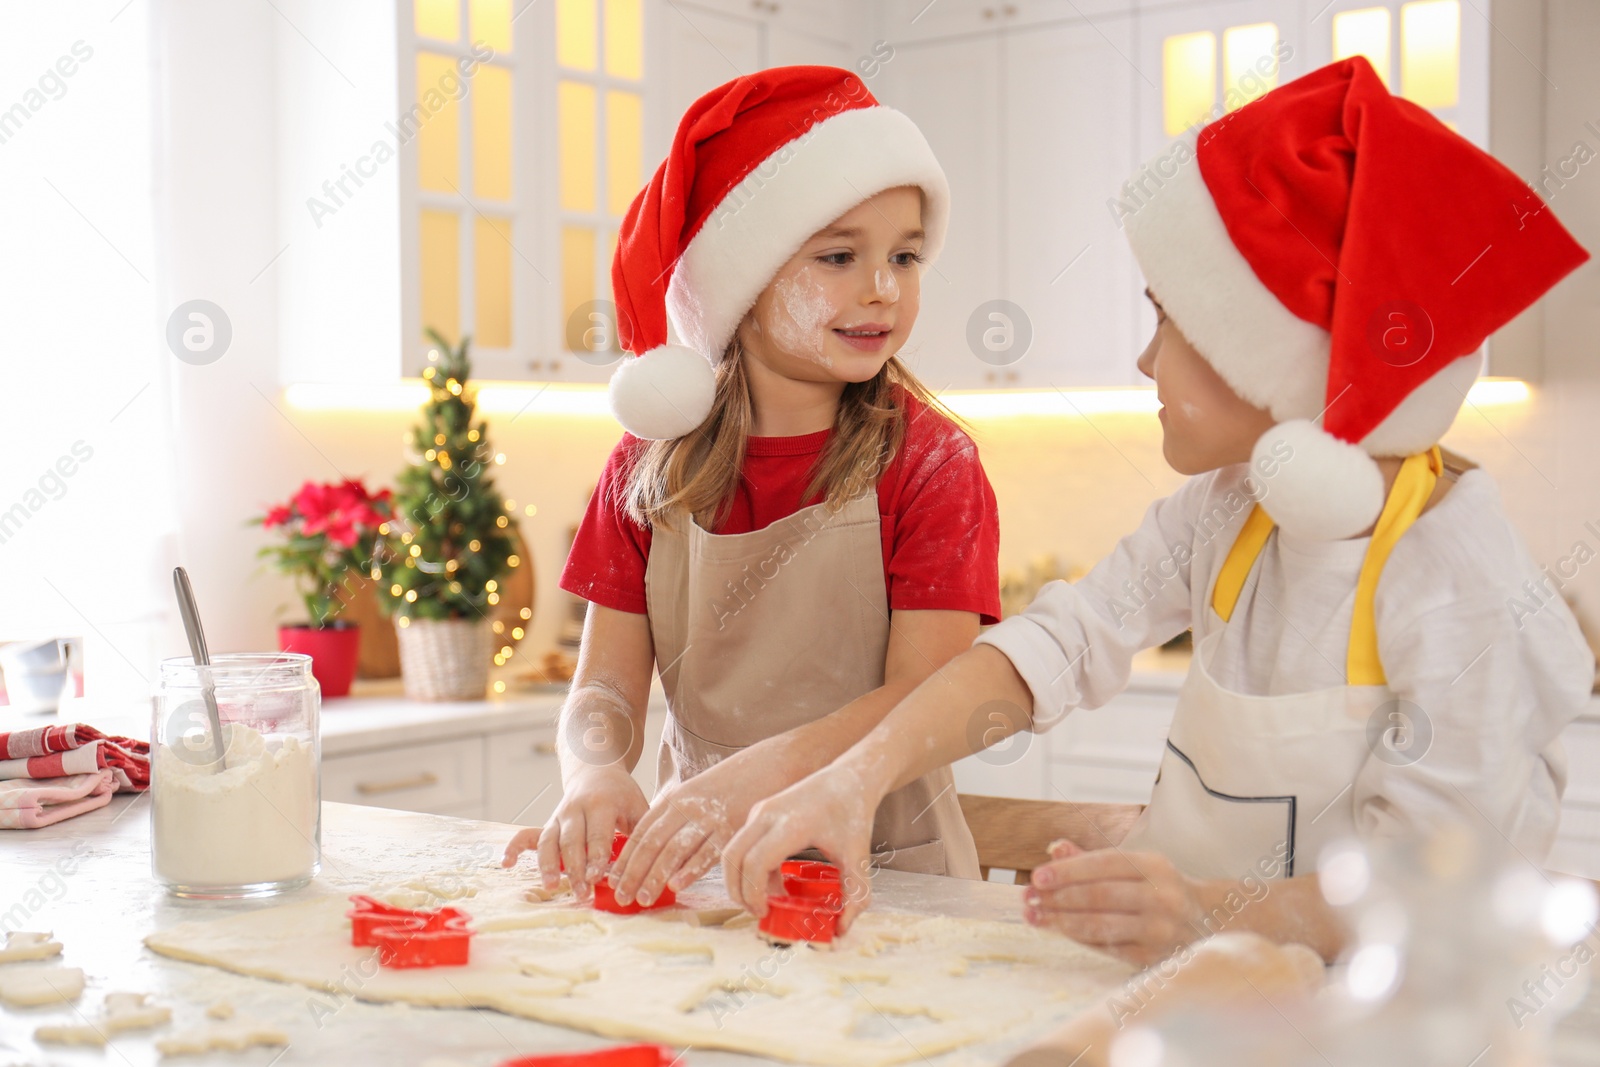 Photo of Cute little children making Christmas cookies in kitchen